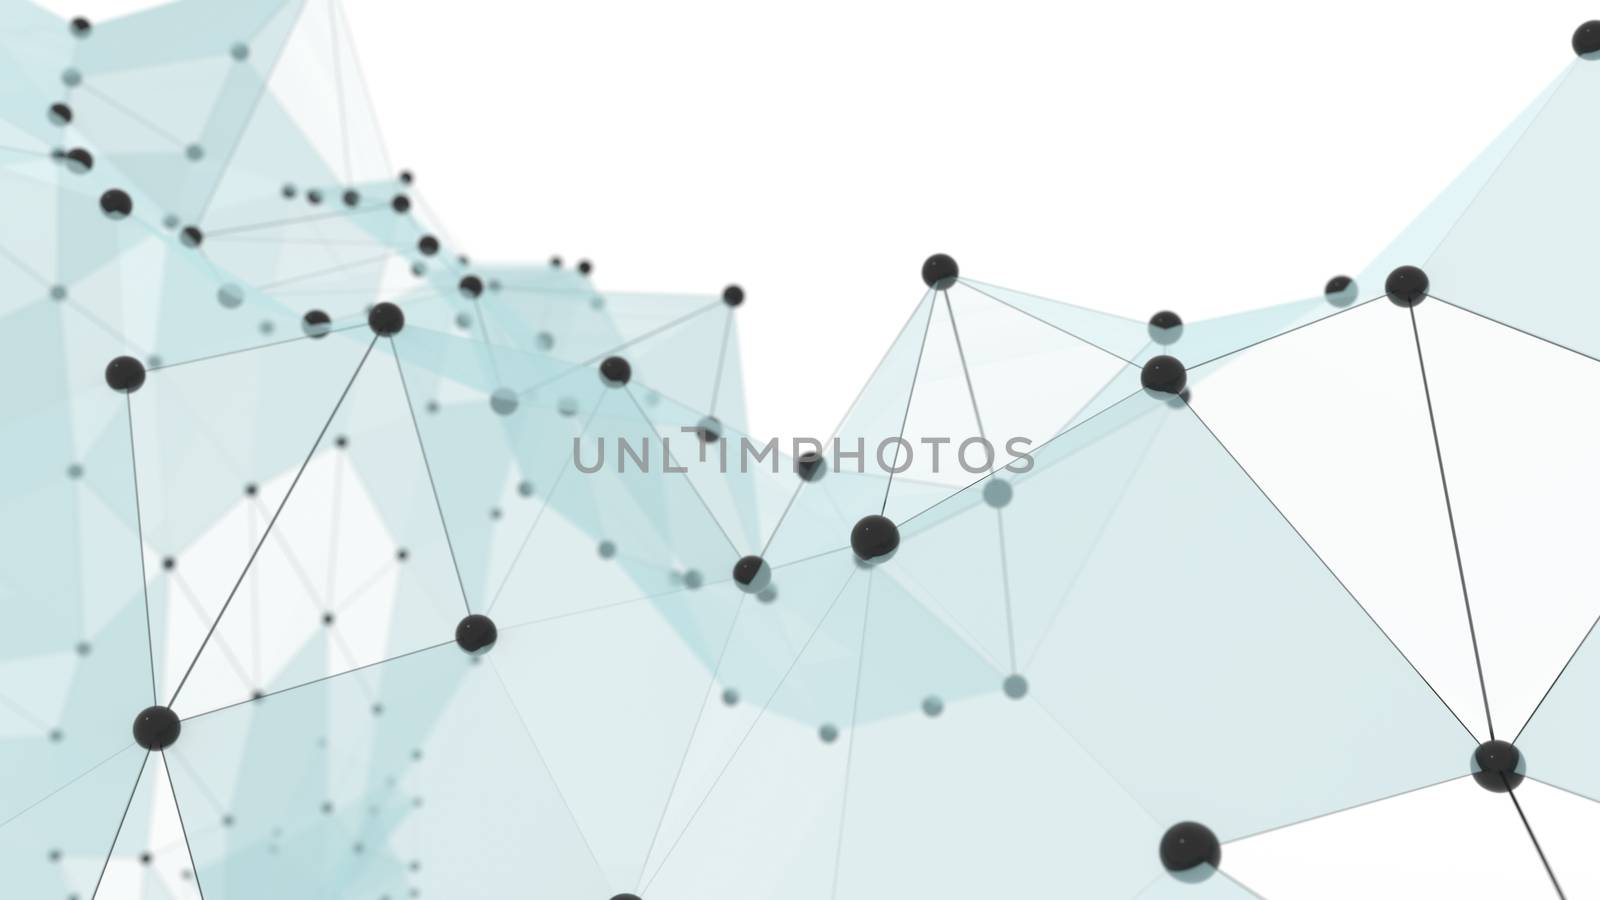 Creative social network. The black points are connected by lines and blue transparent triangles. 3d illustration